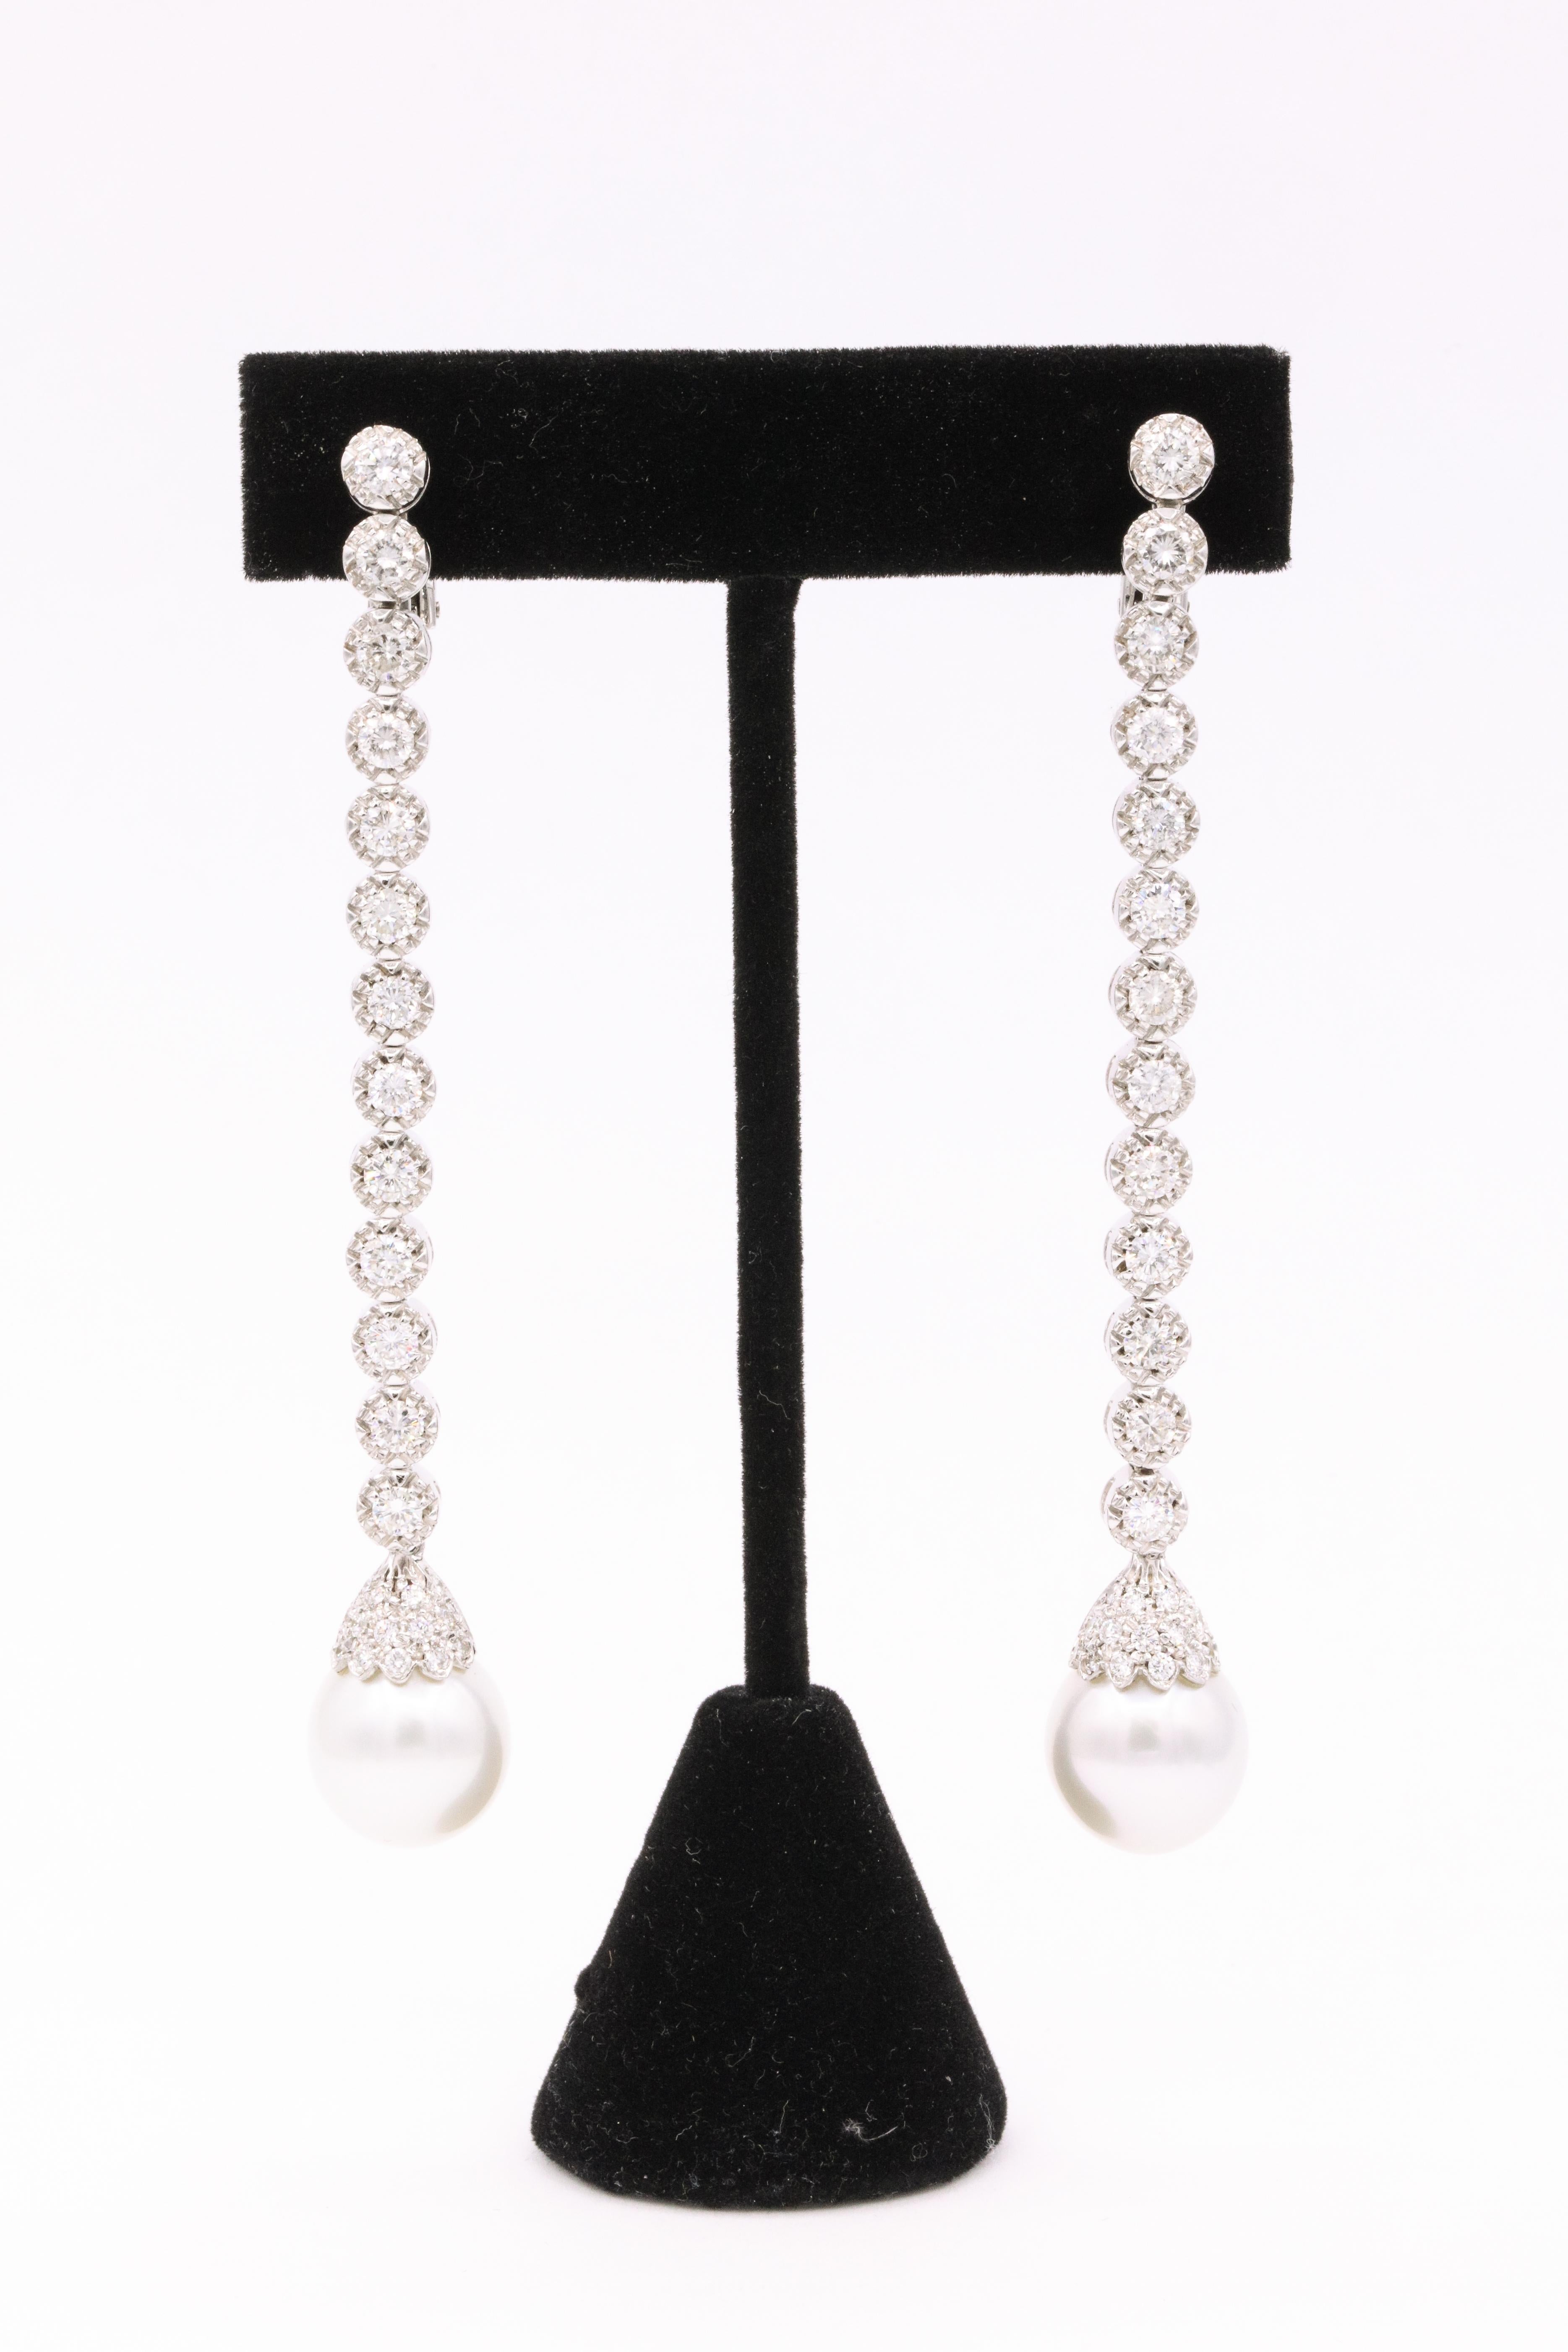 Gorgeous Australian South Sea earrings featuring 26 round brilliants weighing approximately 5 carats.
Pearls measure 13 x 17mm
Color: G-H
Clarity: VS

A Real Show Stopper!!!

Can be shorten upon request.